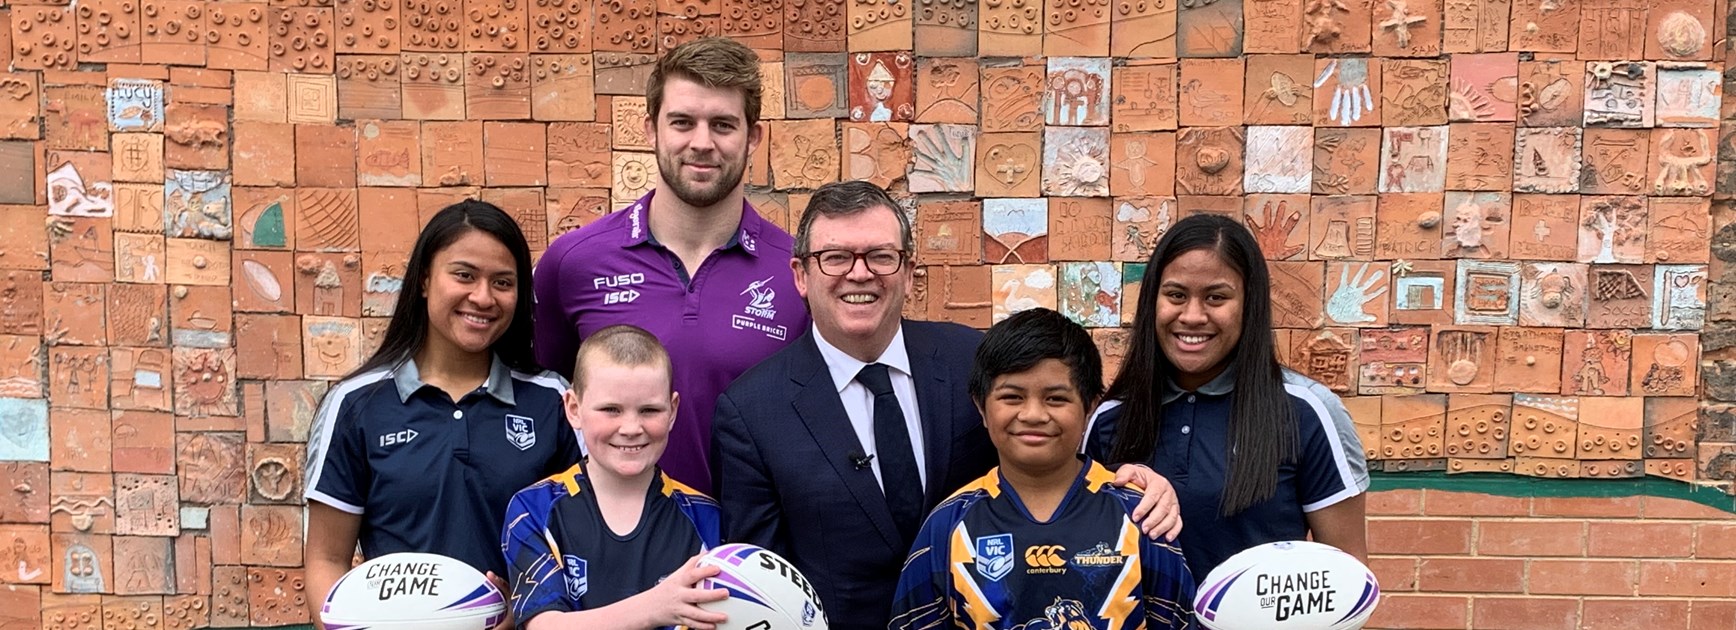 New Field of Dreams for rugby league in Victoria